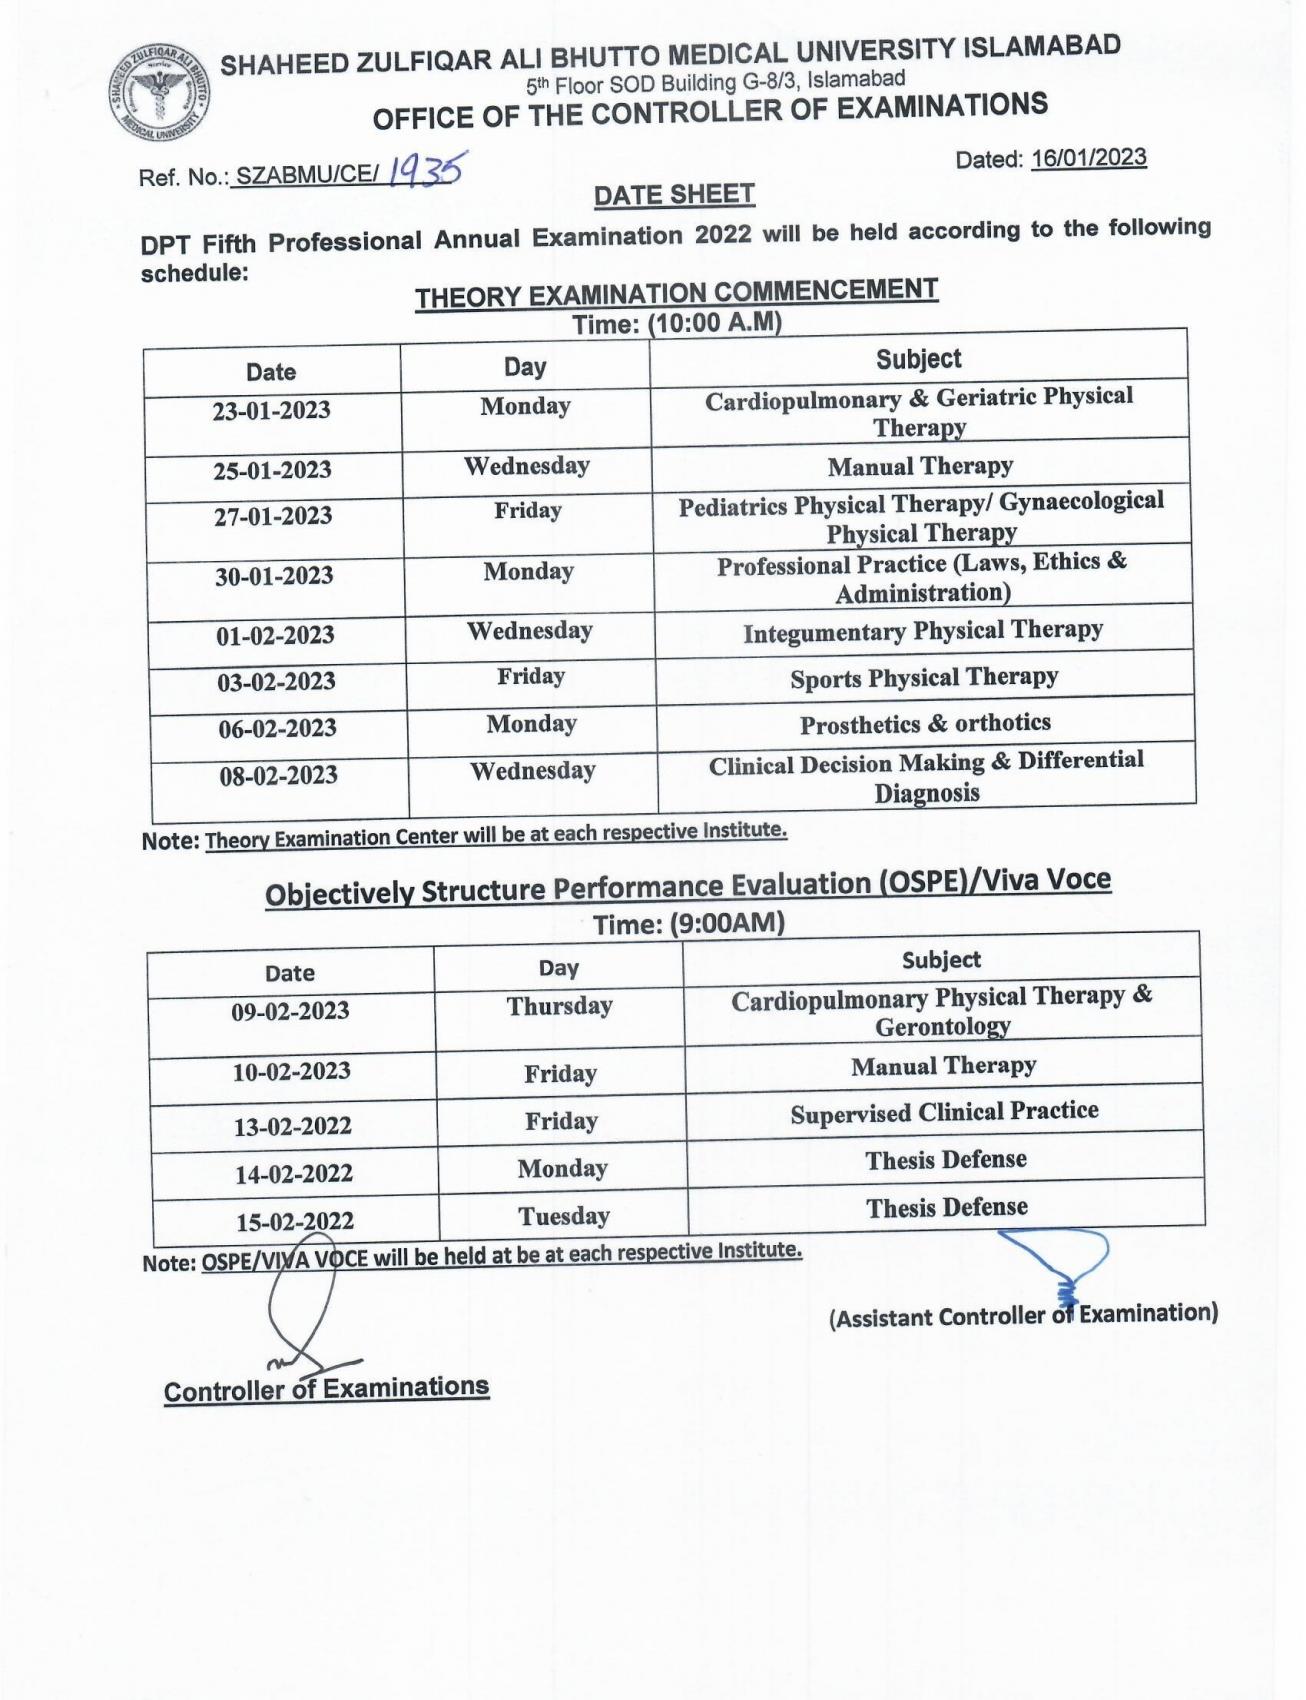 DPT Fifth Professional Annual Examination 2022